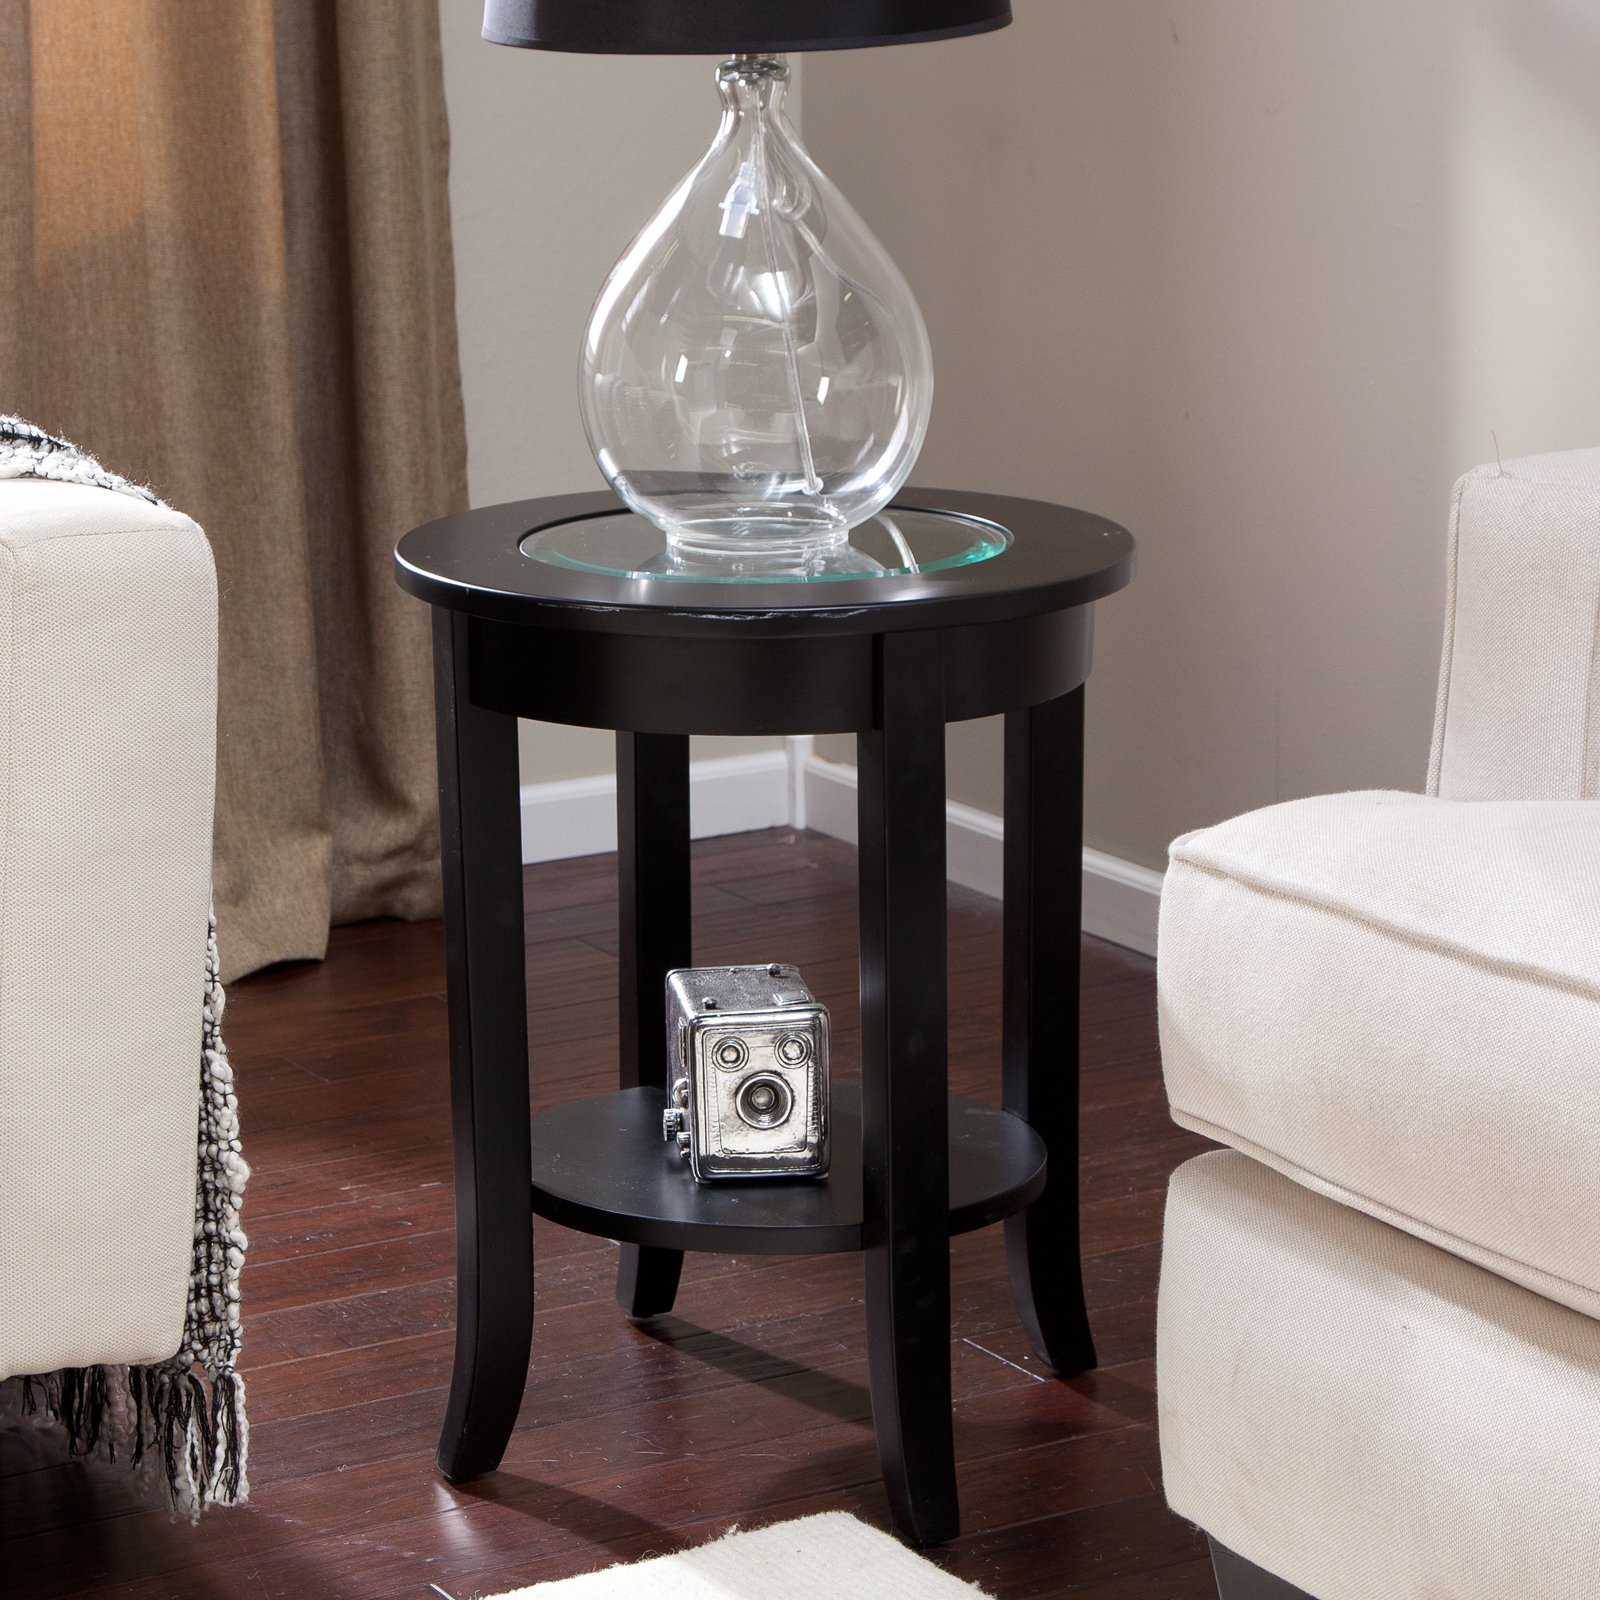 eaton end table master round ideas white wicker making wood bronze dog house building plans runner rustic coffee and tables made from pallets pyramid badcock recliners kmart